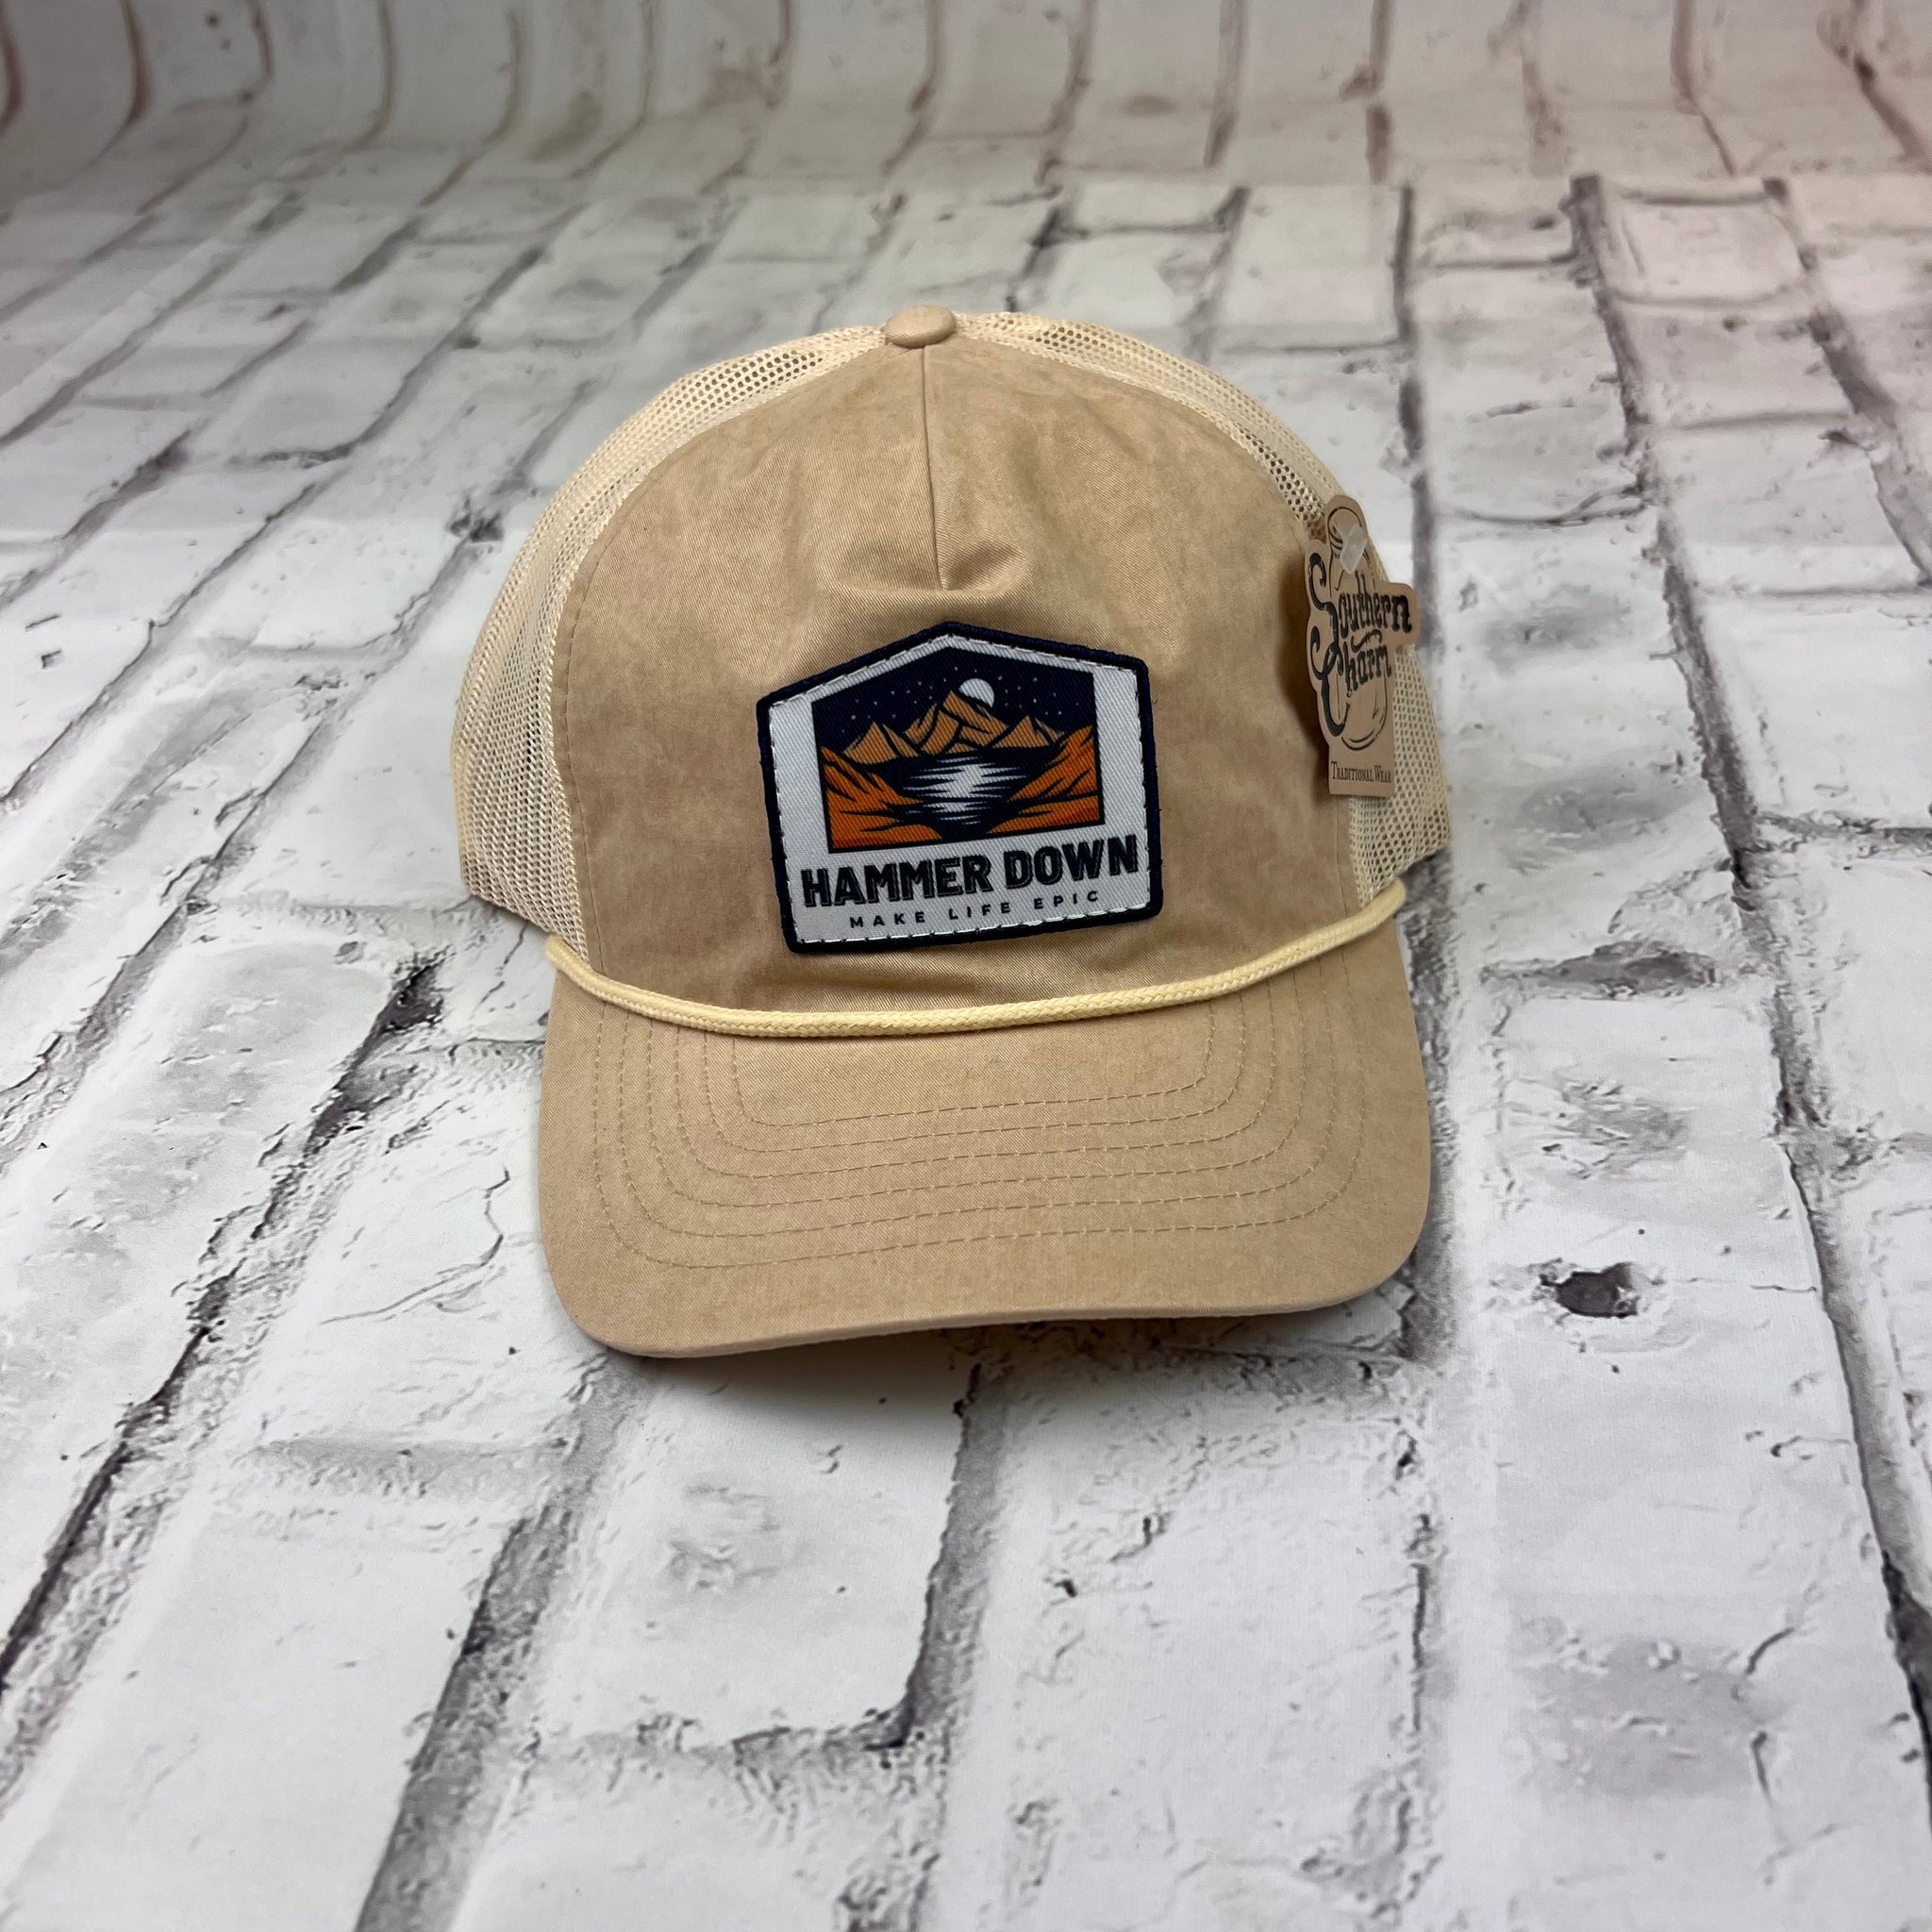 Hammer Down "Mars Mountain" Hat - Tan and Sand with Leather Patch